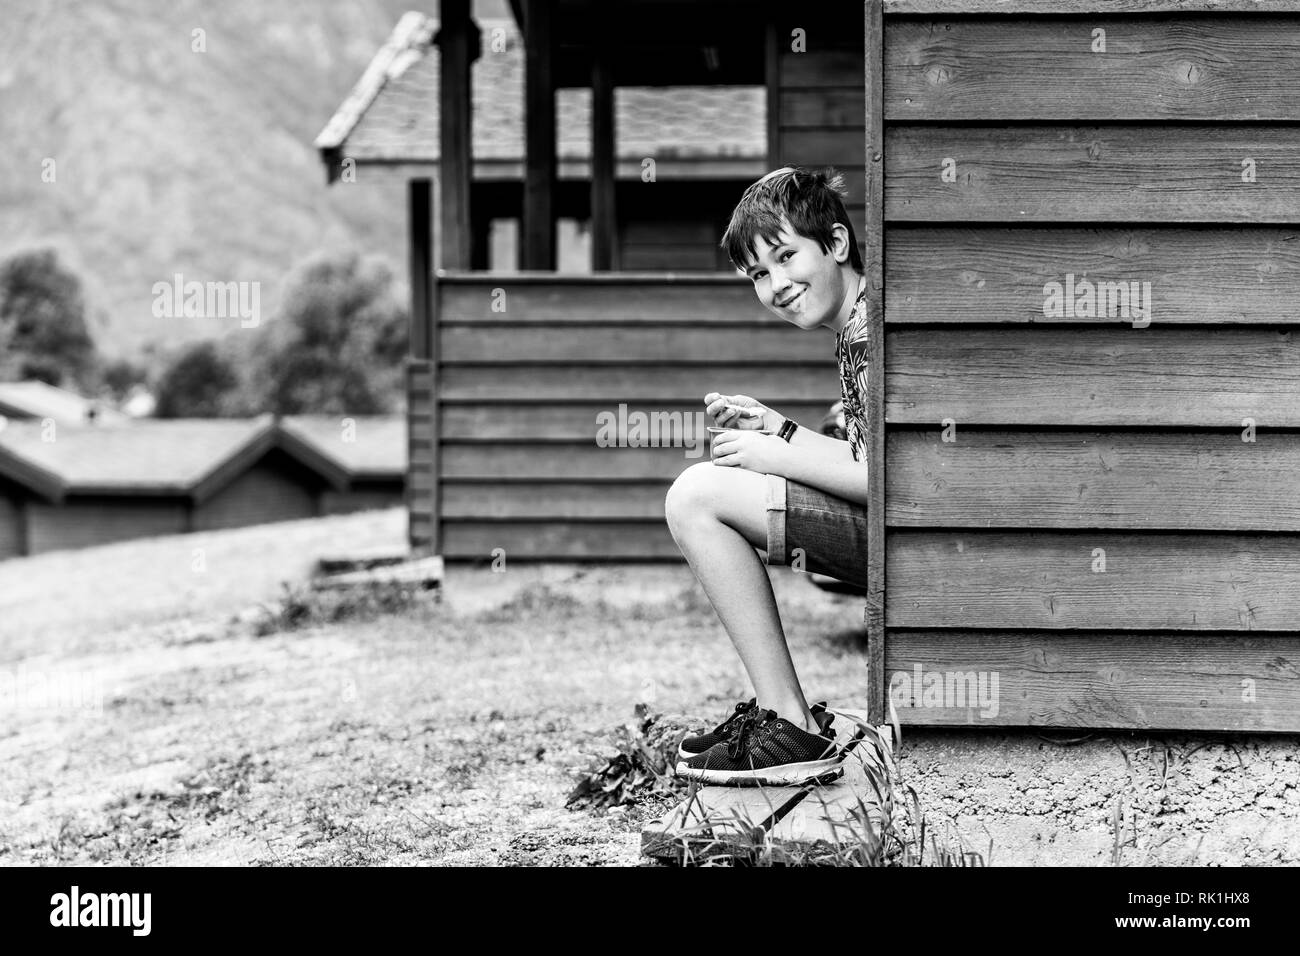 Portrait of boy sitting on steps by holiday chalet, black and white image, Flam, Norway, Europe Stock Photo